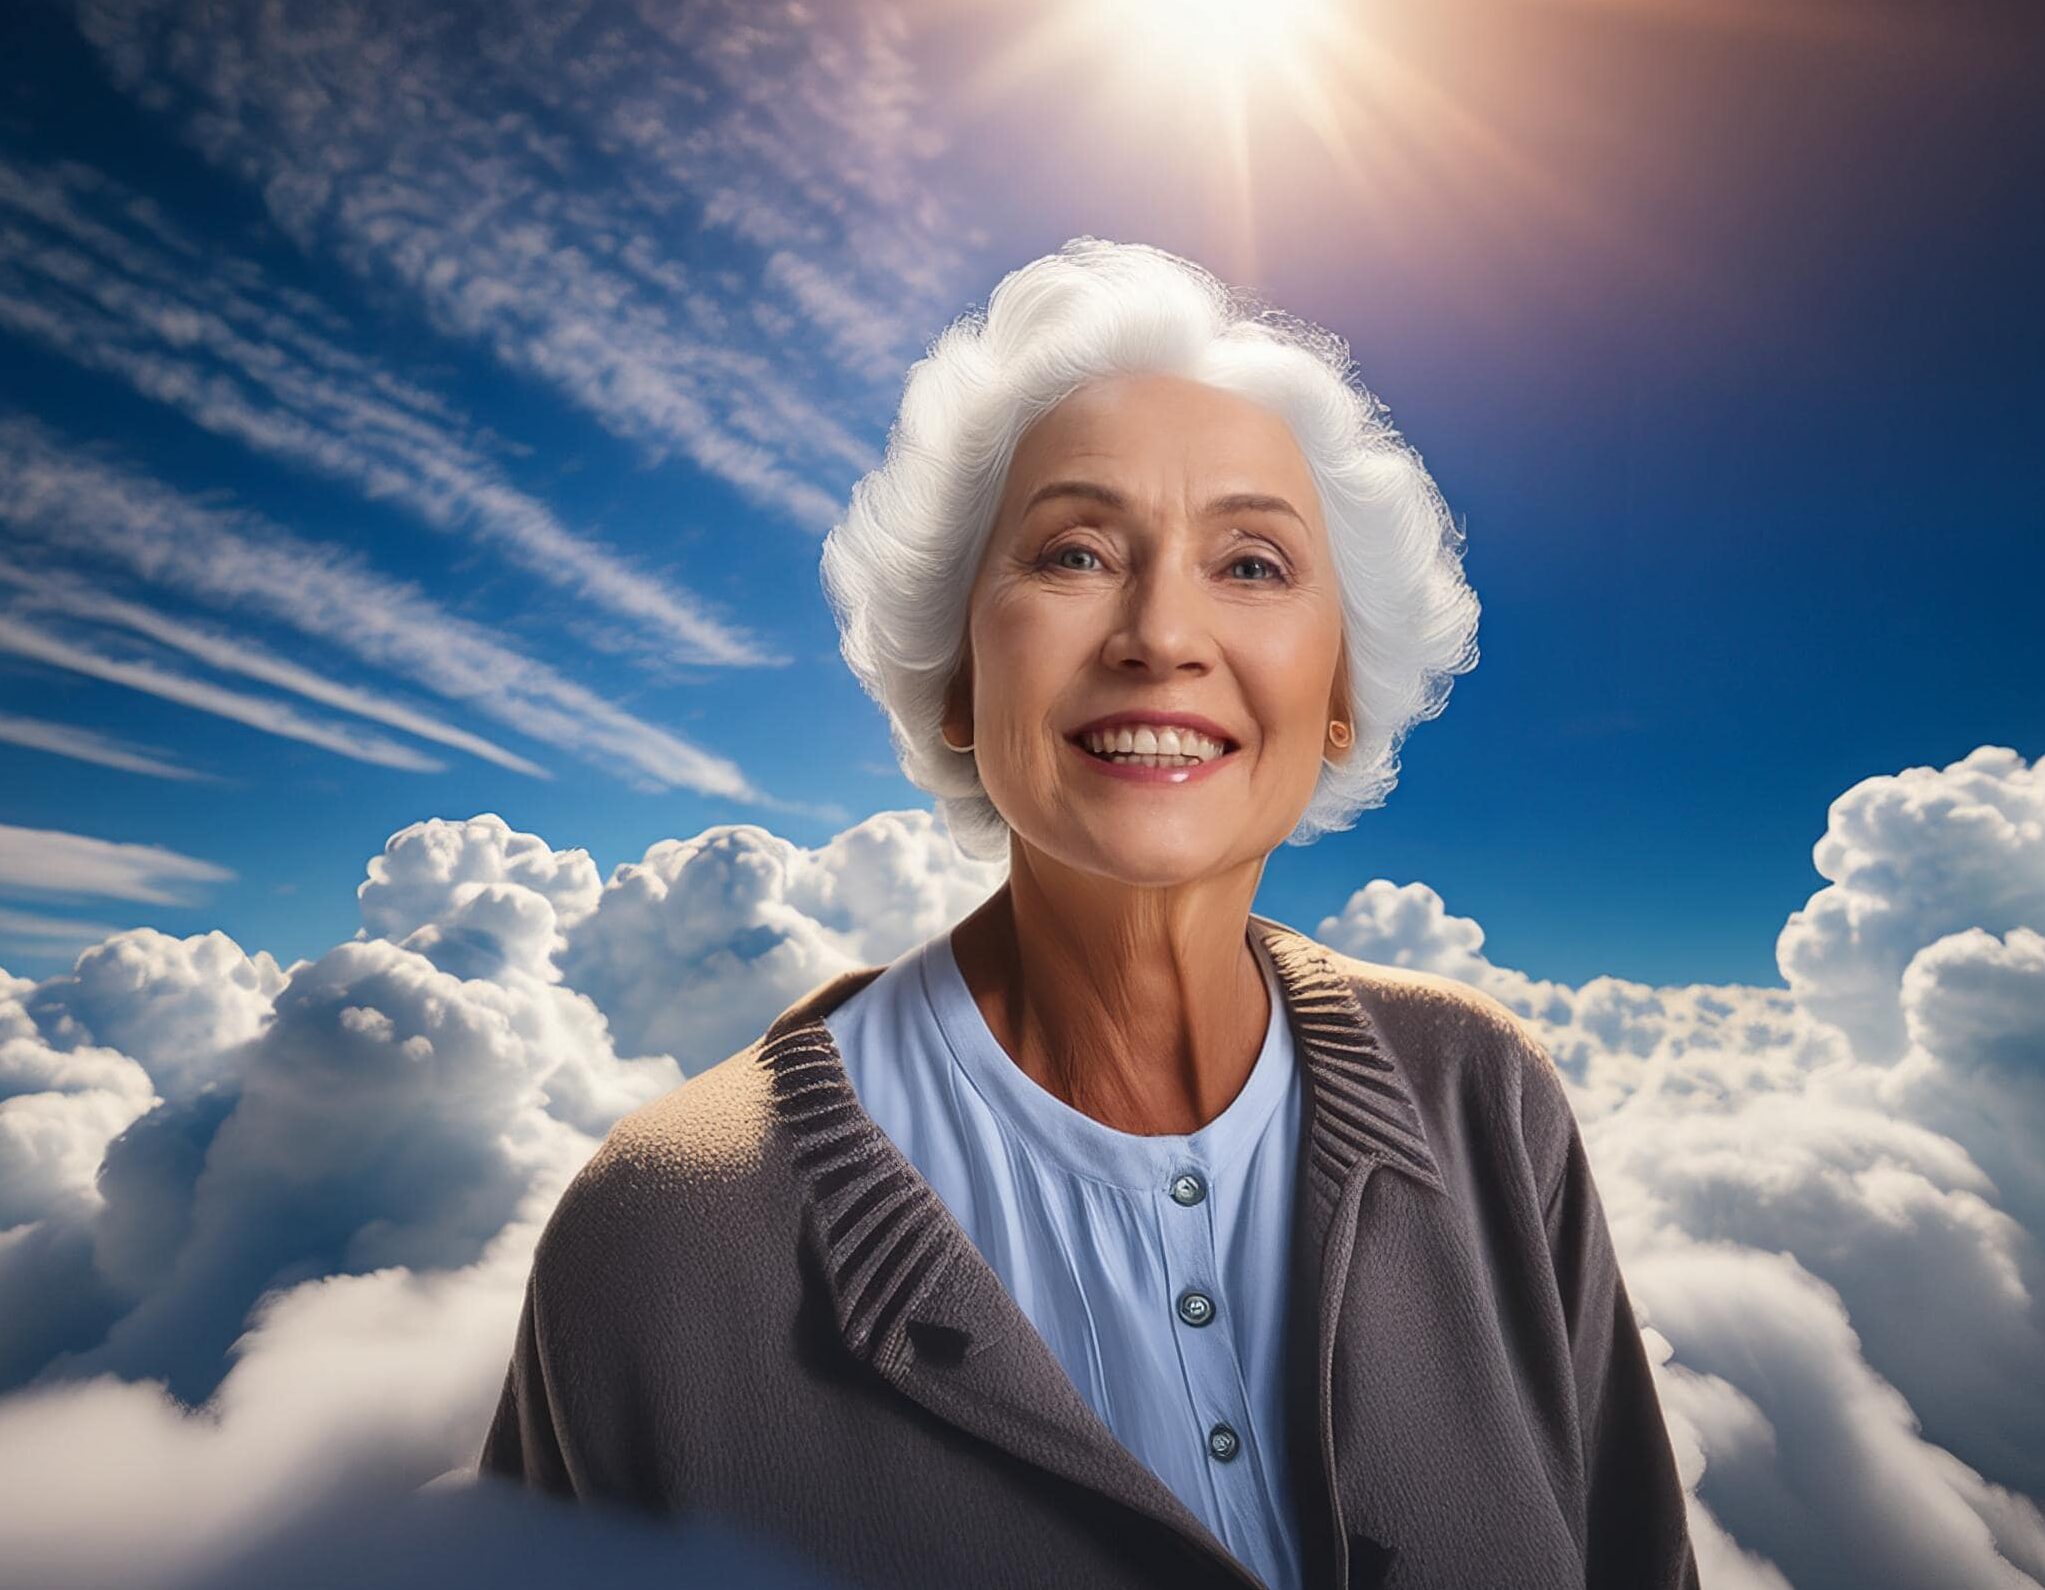 Firefly An old German female smiling from a corner in heaven surrounded by clouds and sunflare 64717 min edited